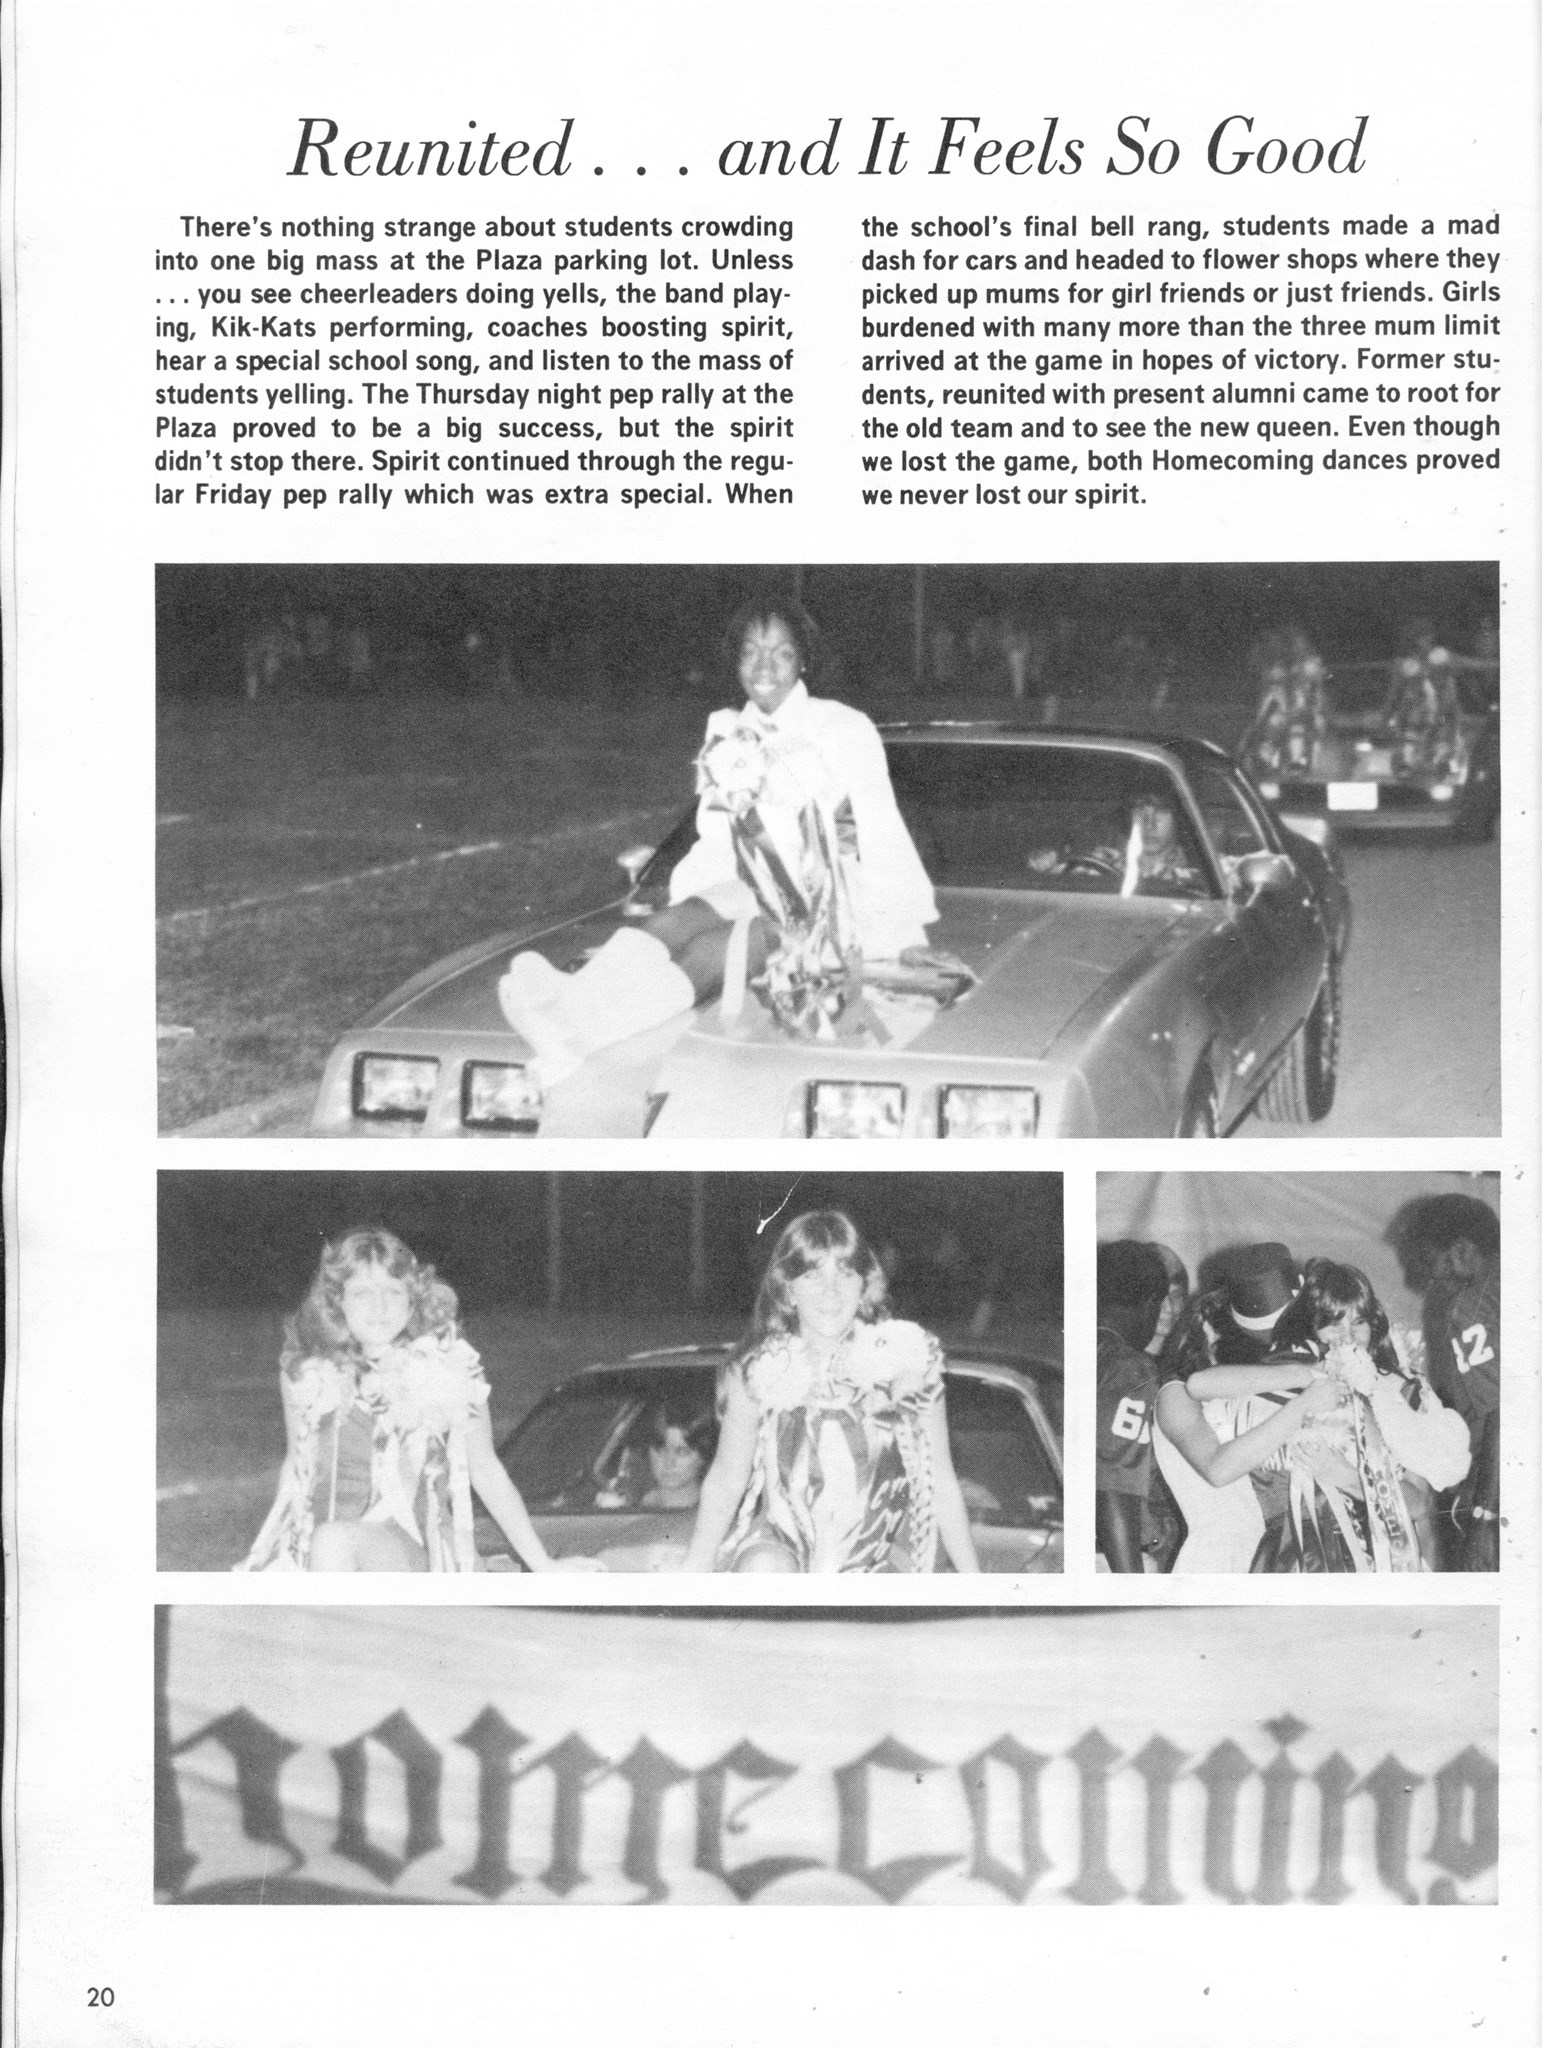 ../../../Images/Large/1980/Arclight-1980-pg0020.jpg